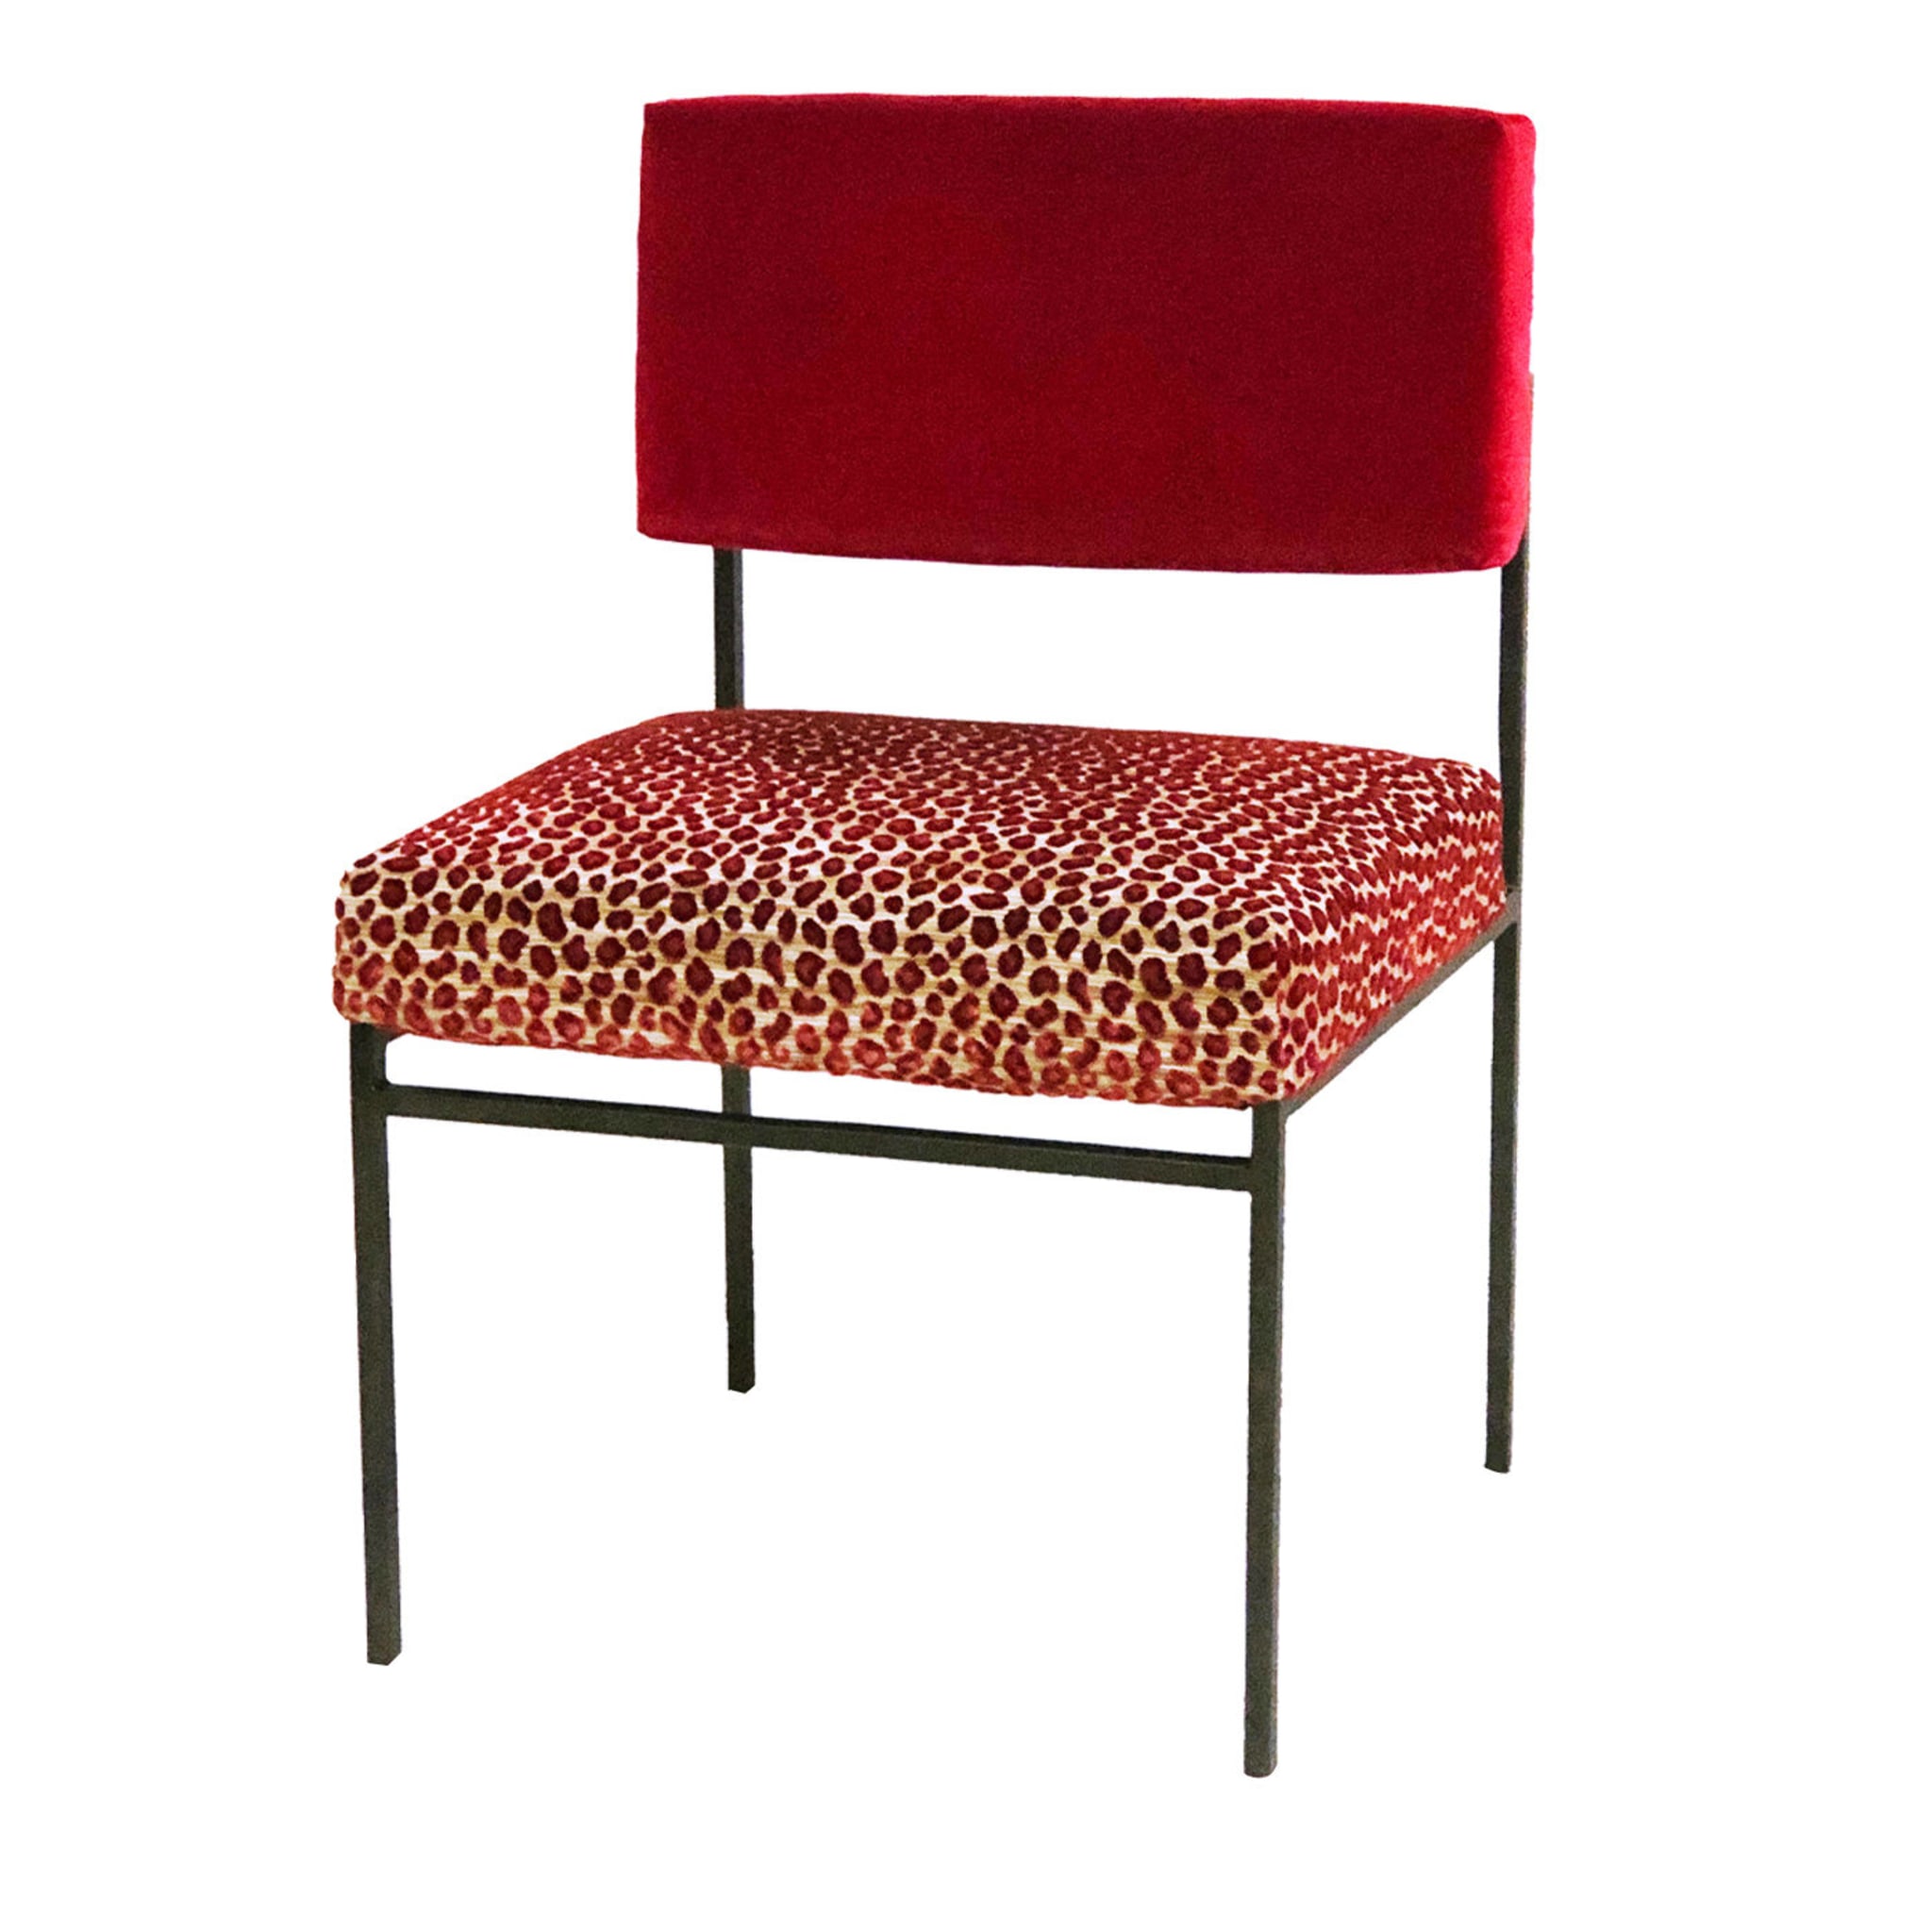 Aurea Red Velvet Chair by CtrlZak and Davide Barzaghi - Main view